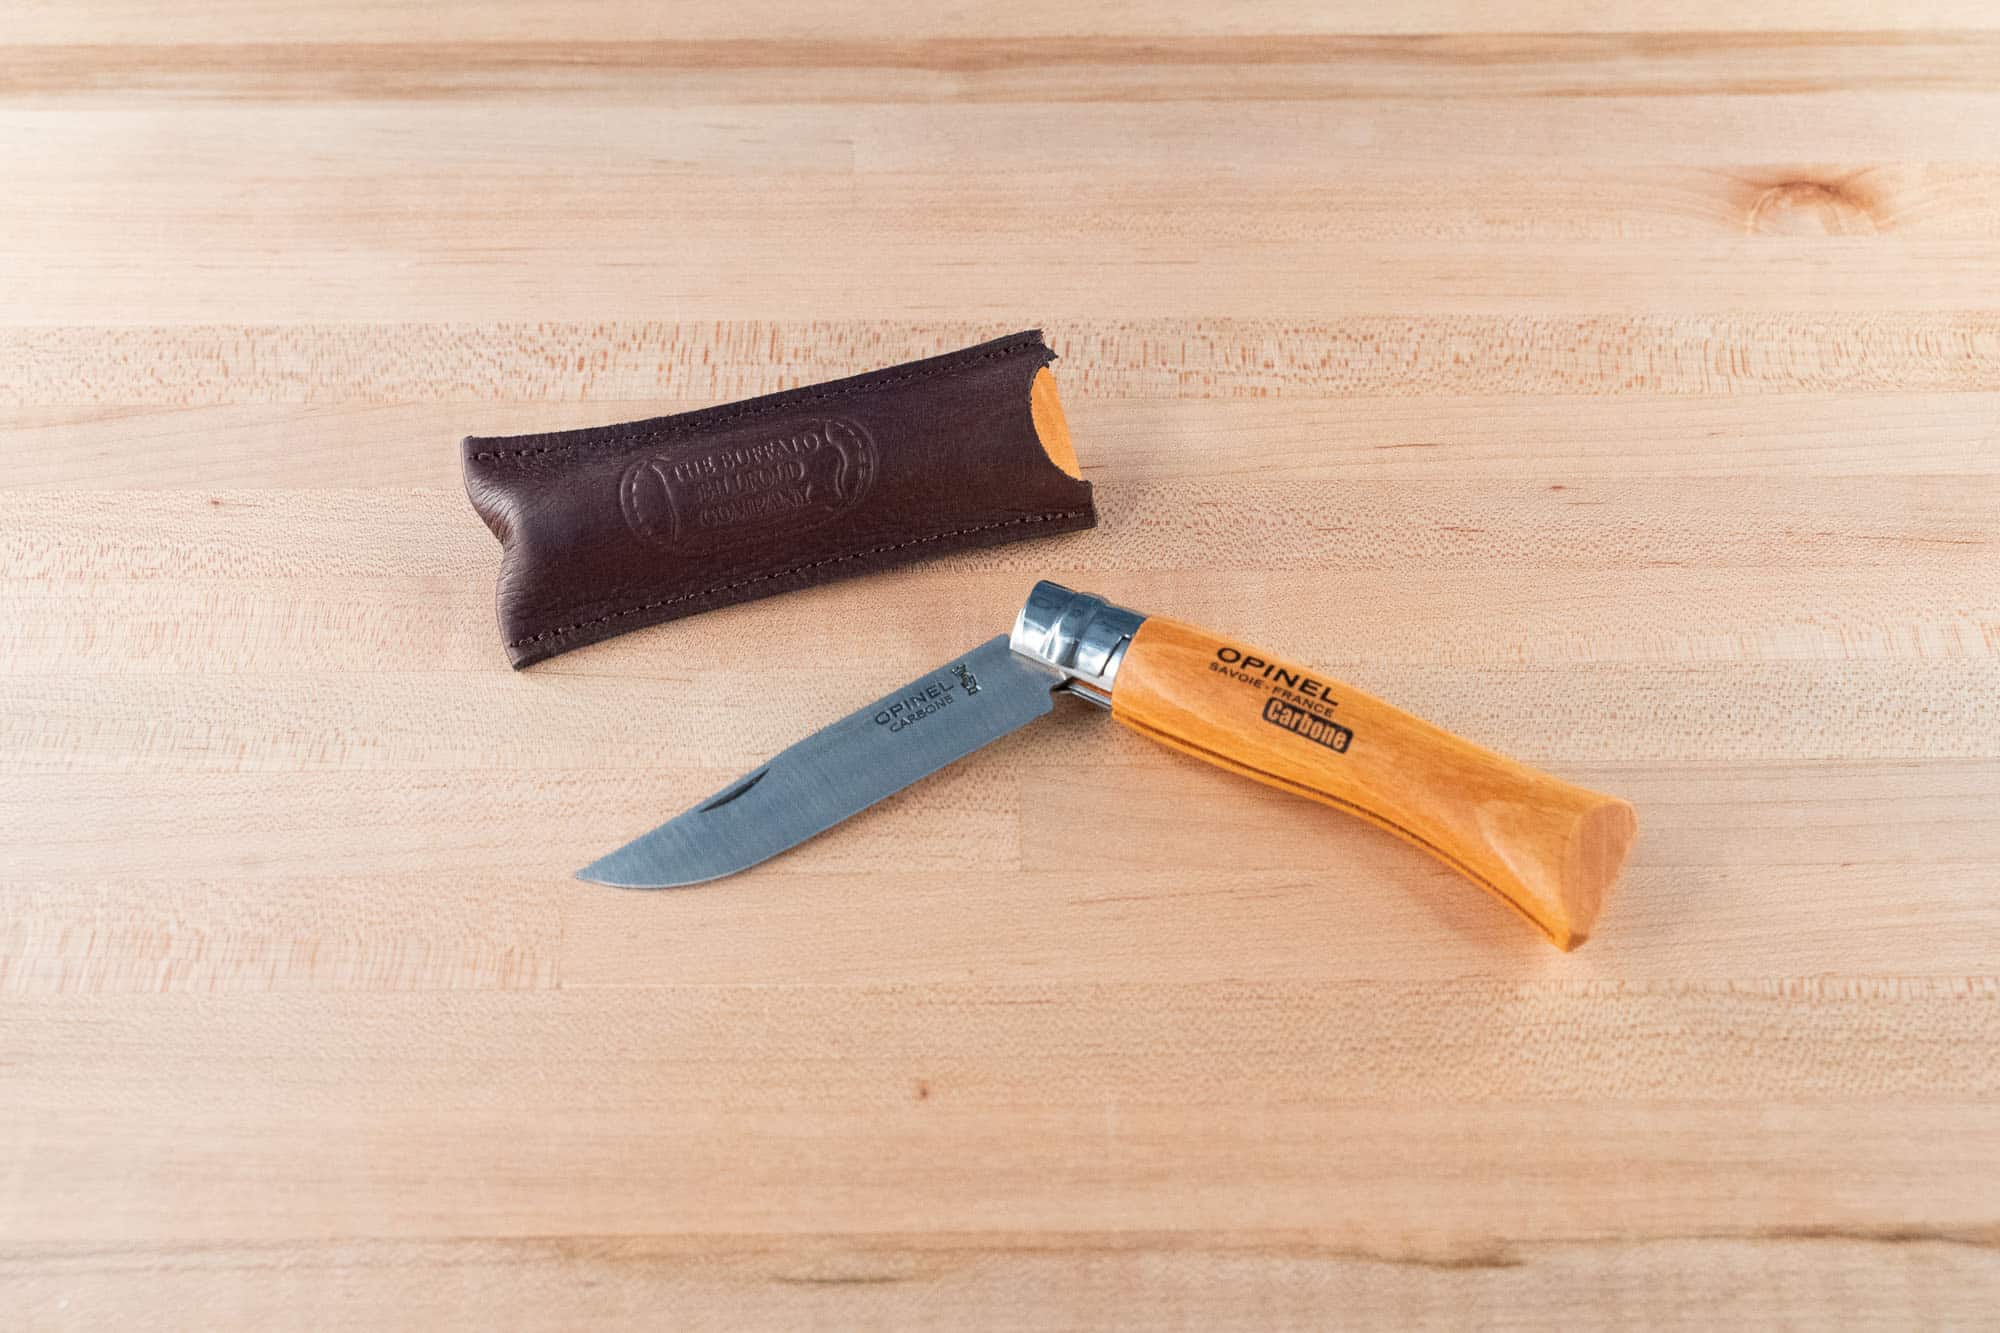 Opinel Carbon No.08 Folding Knife from Opinel